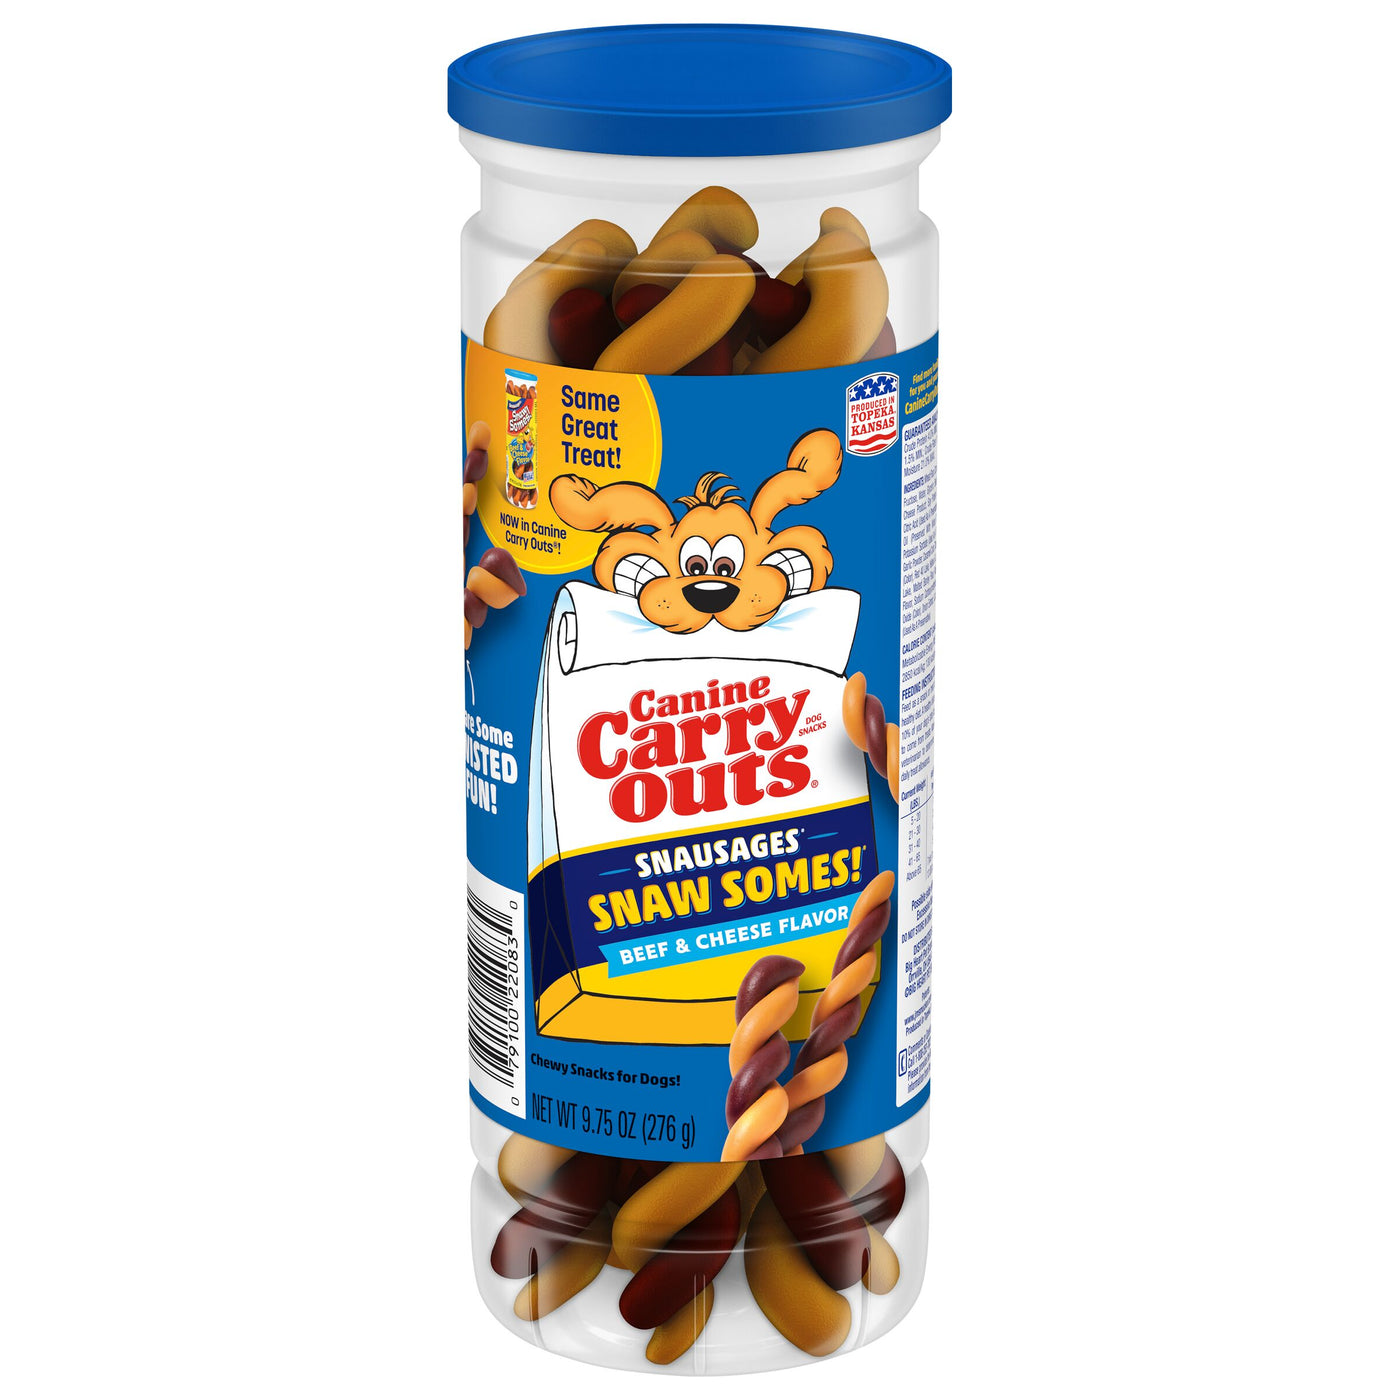 Canine Carry Outs Snausages Snaw Somes! Beef & Cheese Flavor Dog Treats, 9.75 Ounces